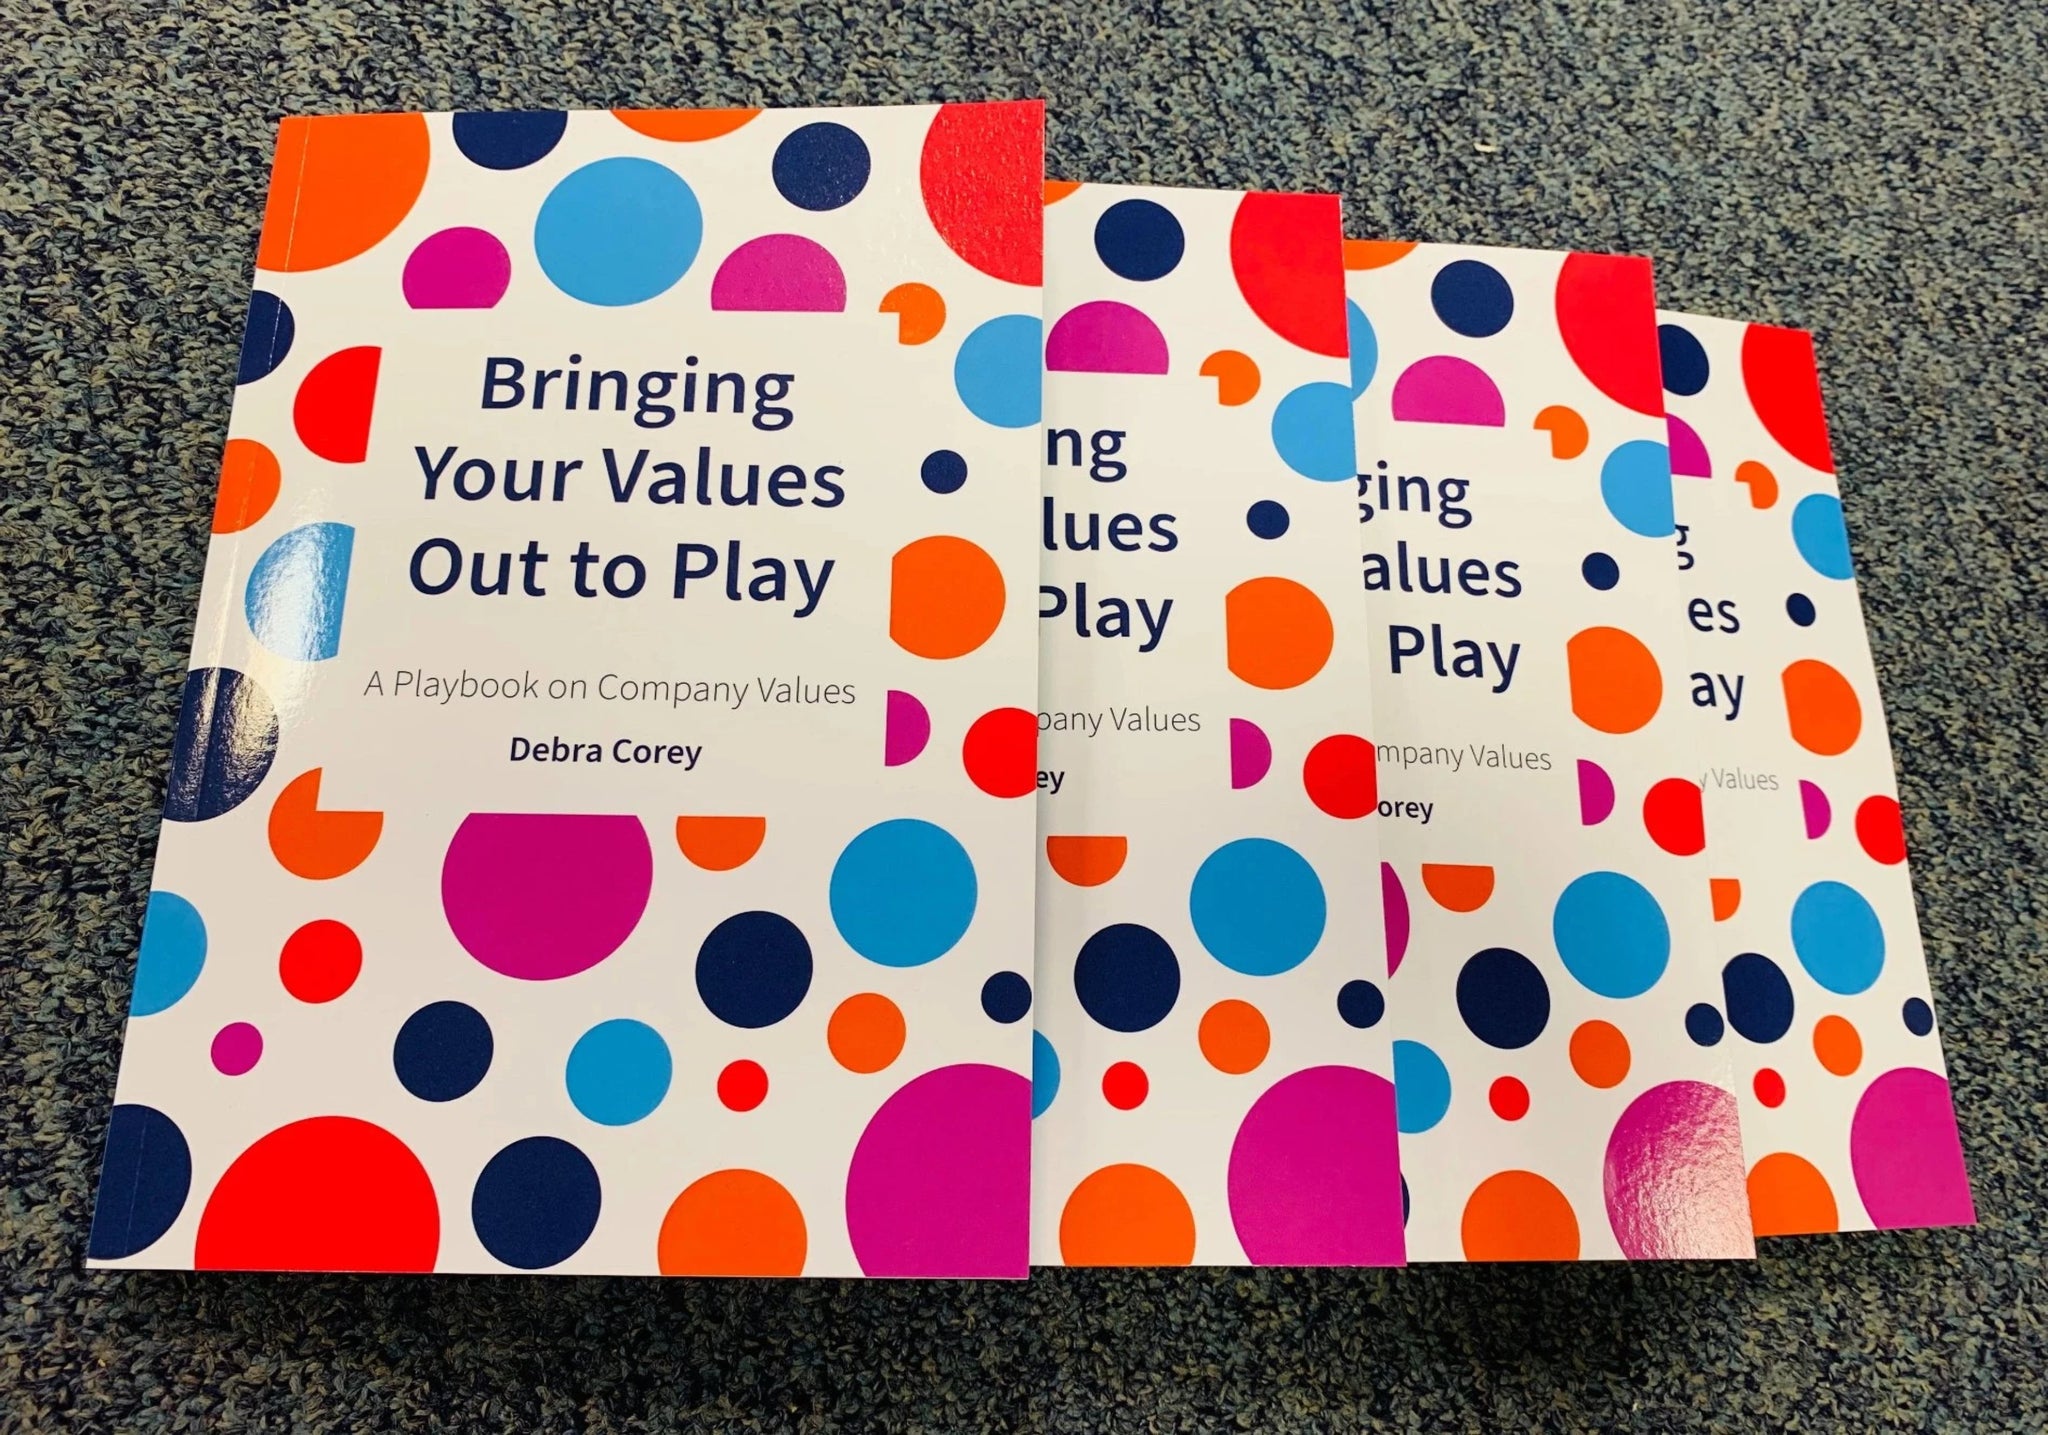 Bringing Your Values Out to Play by Debra Corey